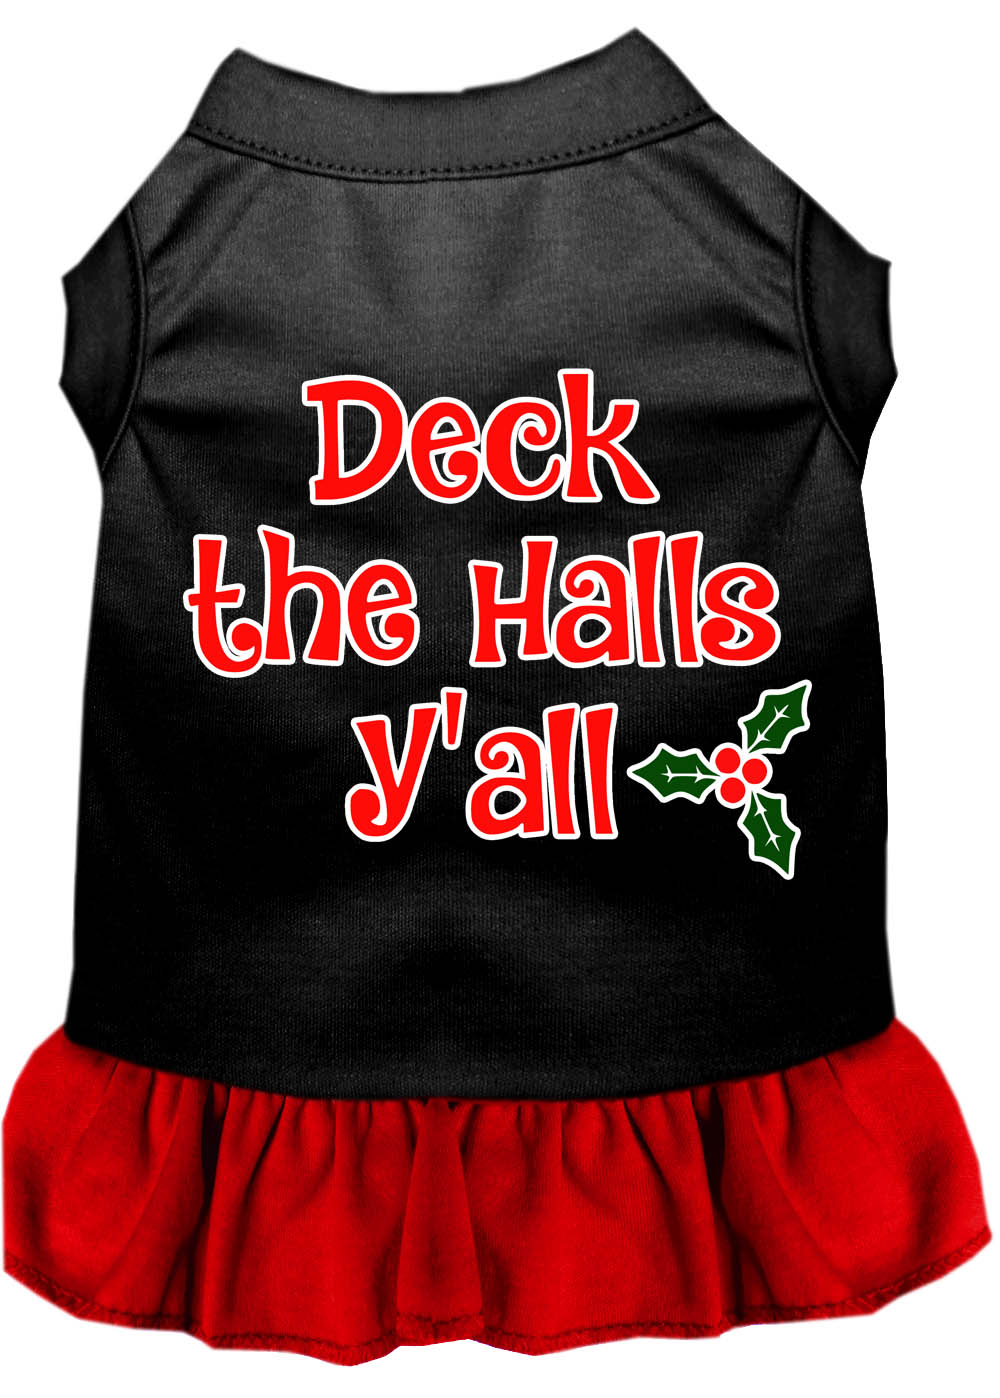 Deck the Halls Y'all Screen Print Dog Dress Black with Red XXL